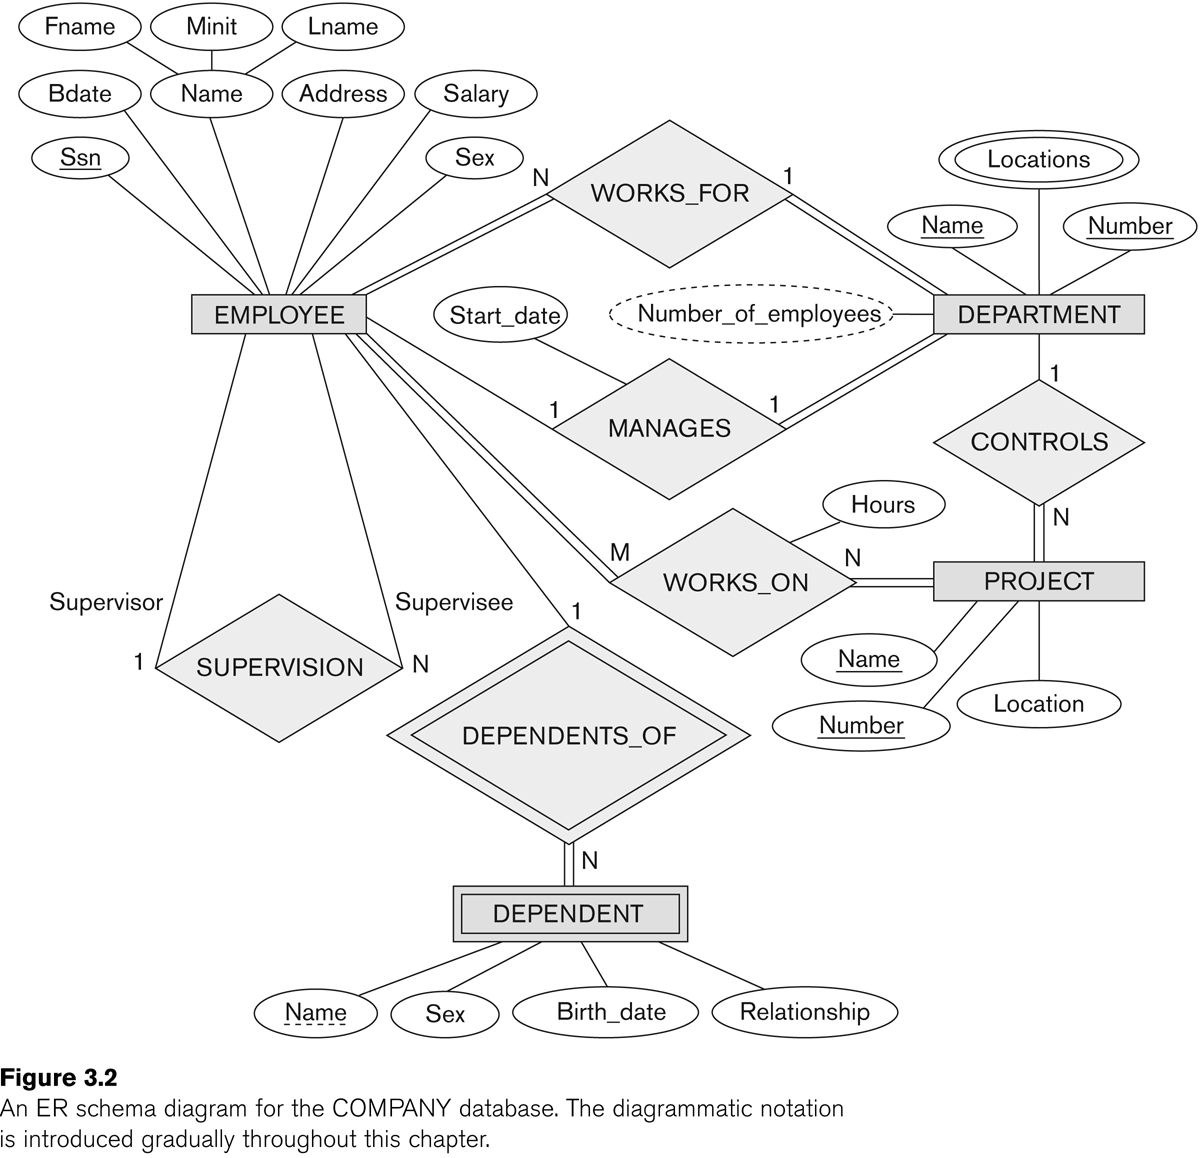 Entity-Relationship Modeling with regard to Er Diagram Examples For Student Information System